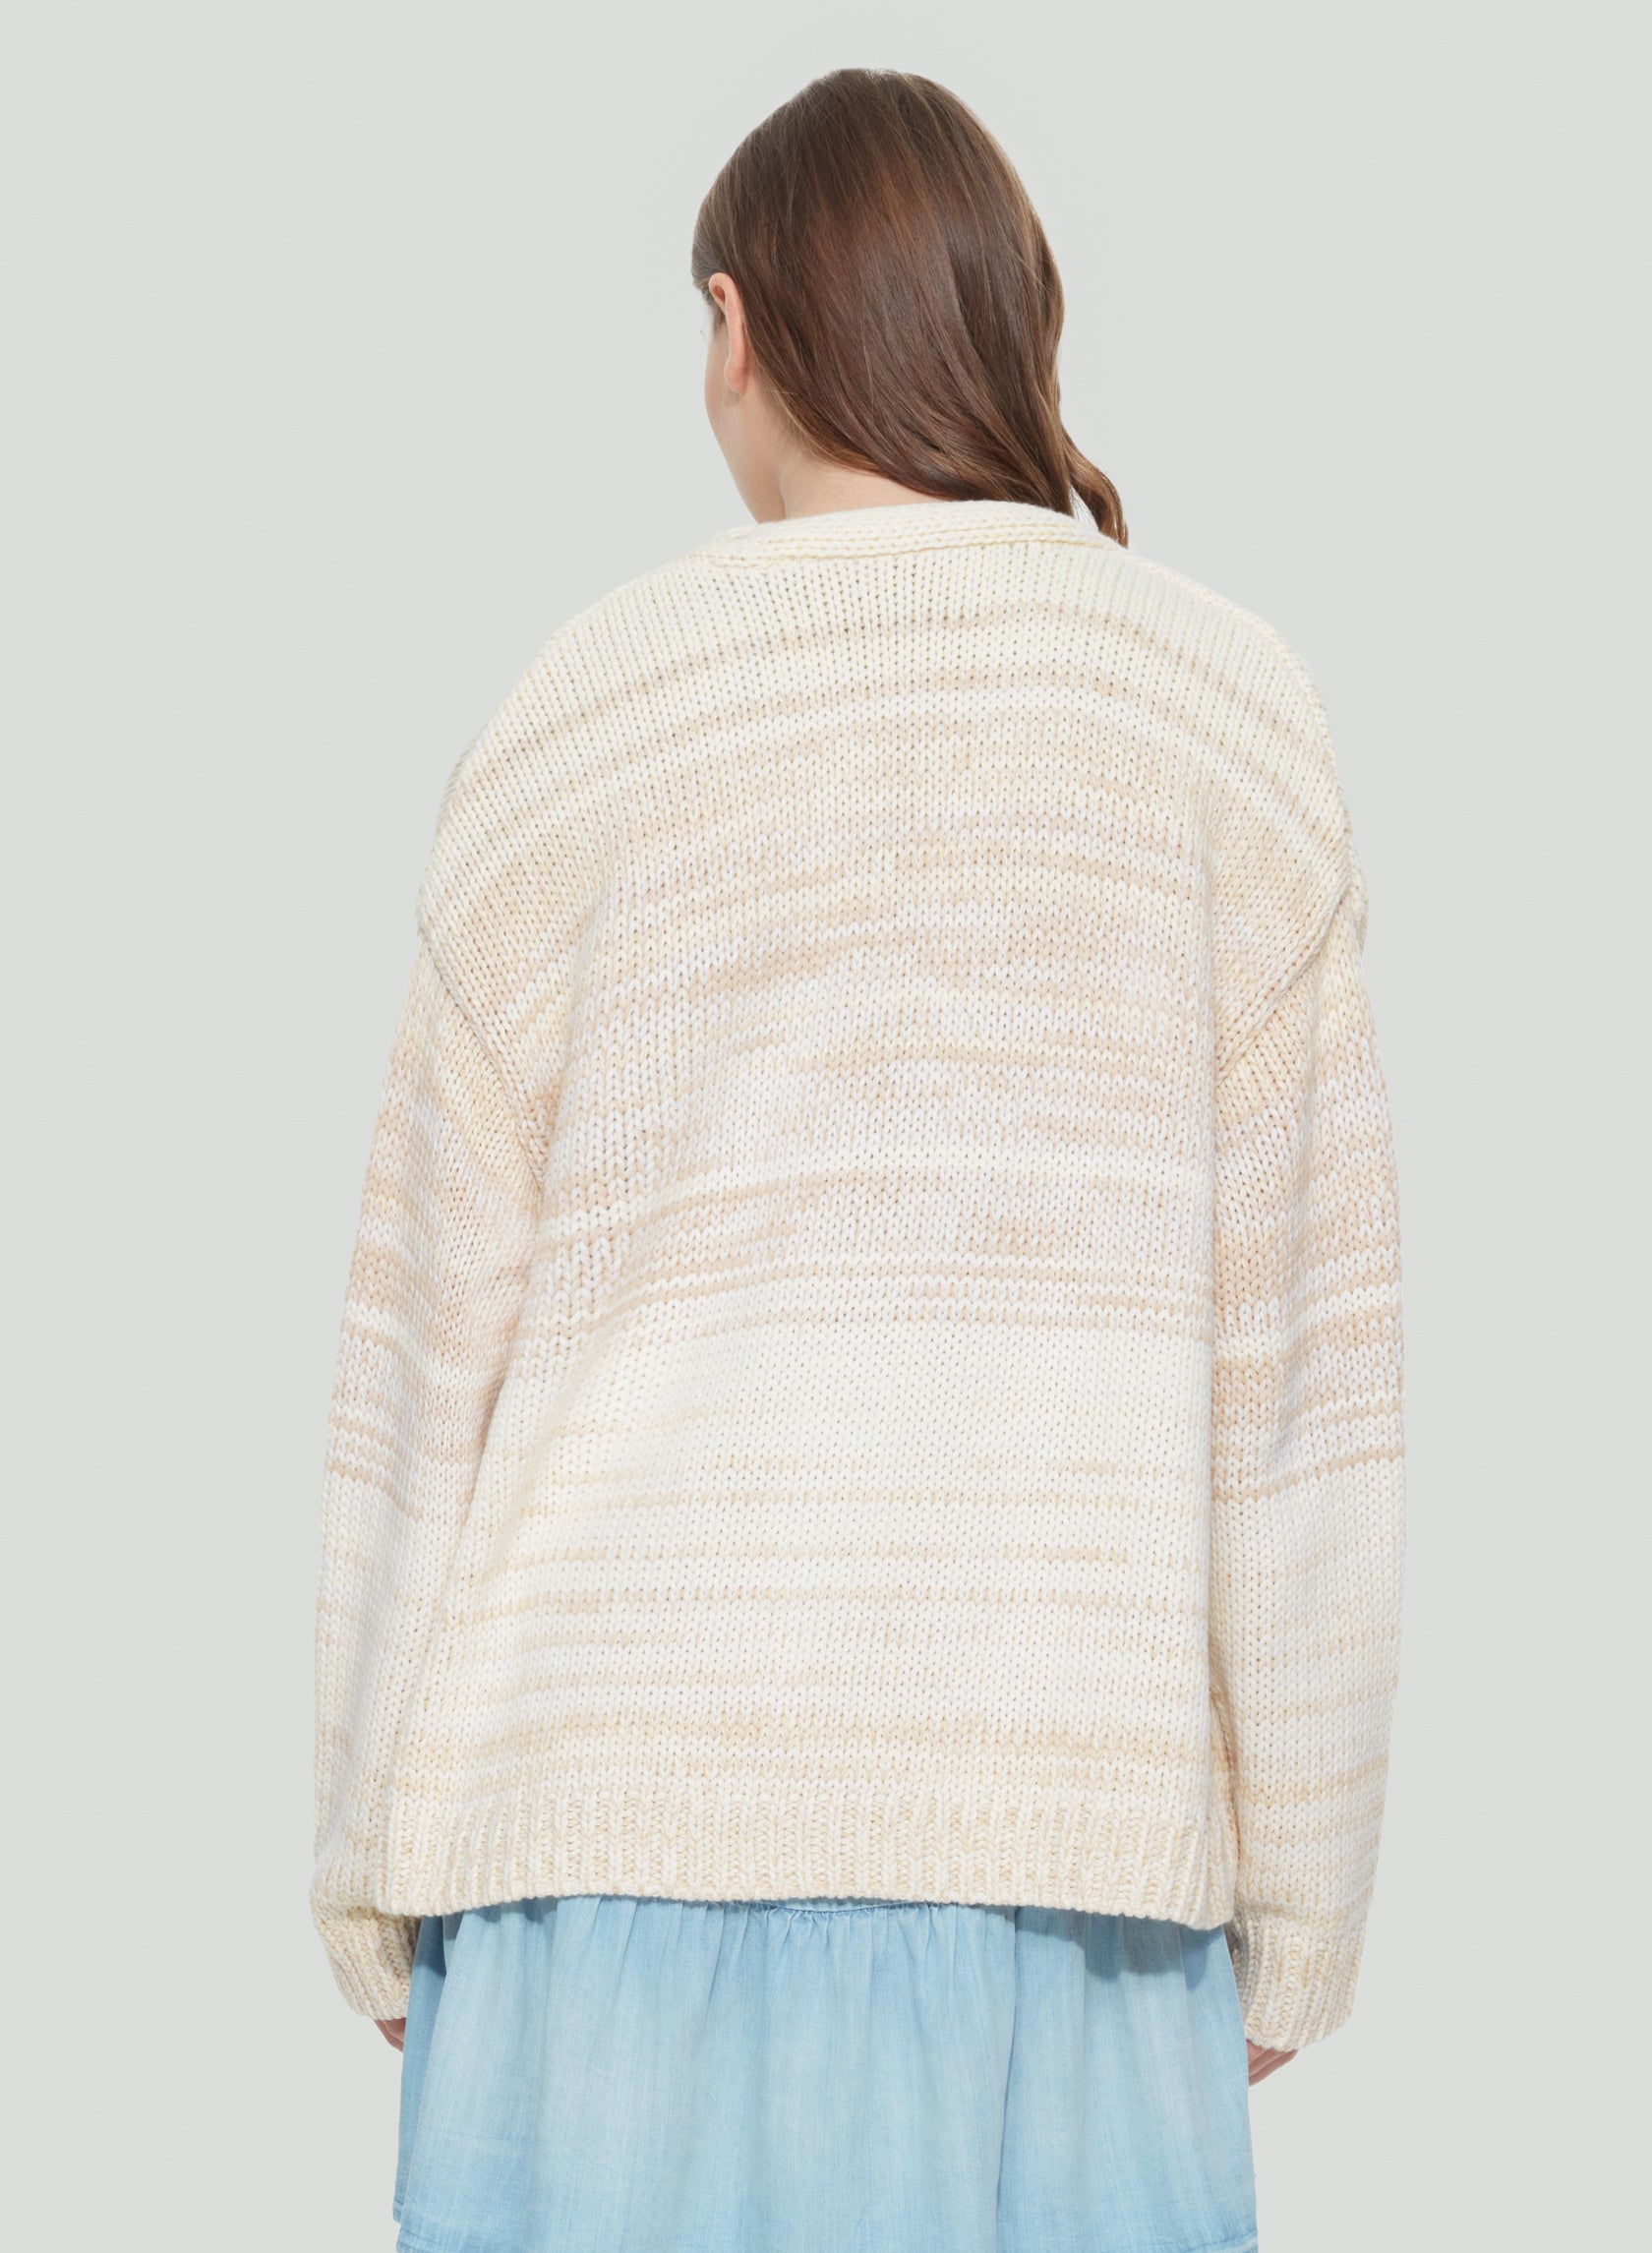 Ombre Cardigan Sweater